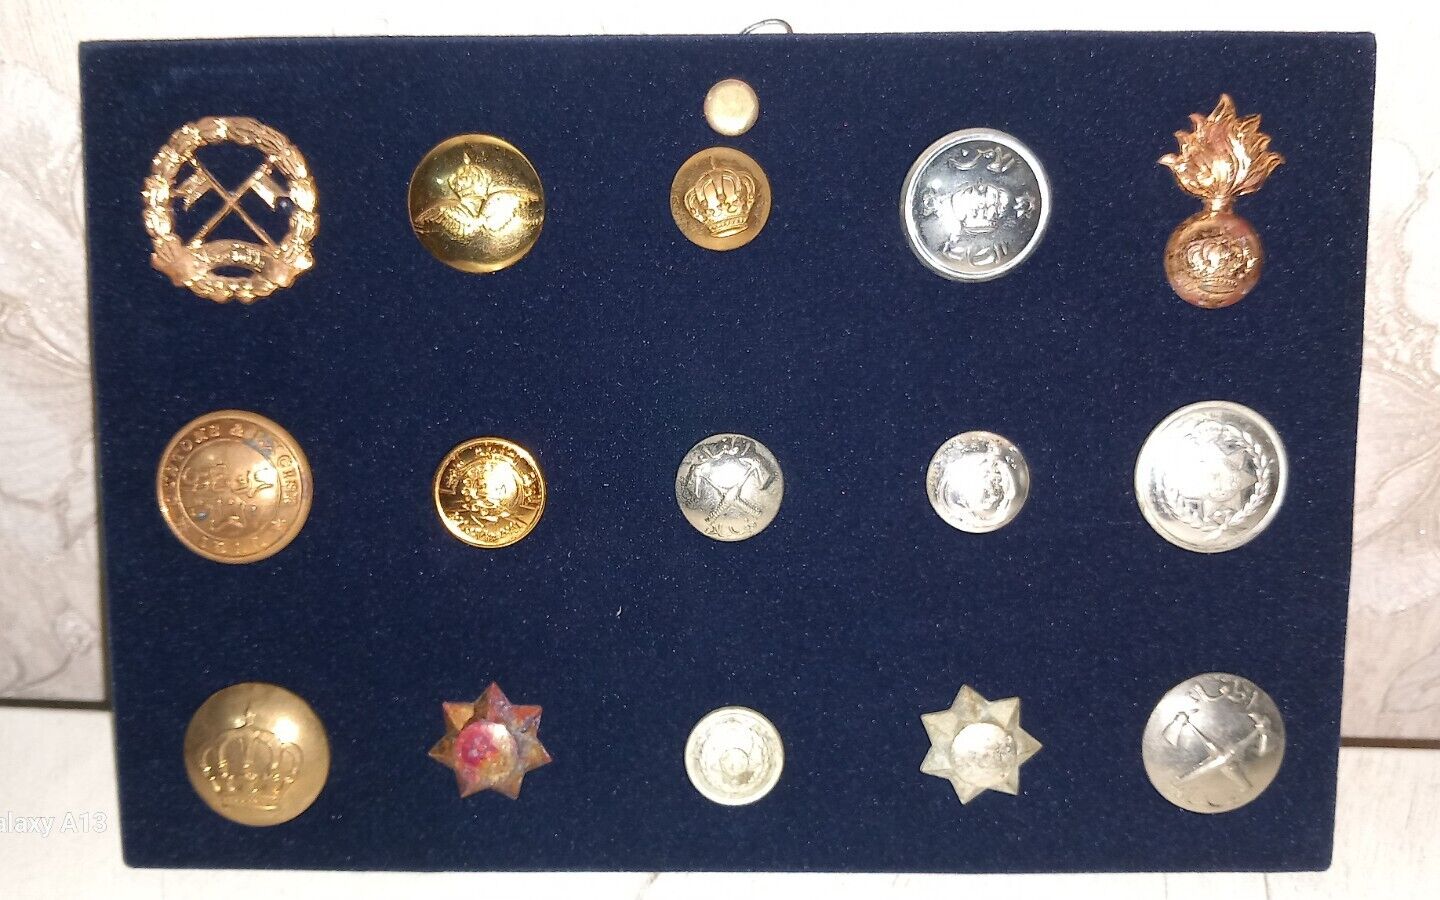 15 rare military buttons, for military uniforms of the Kingdom of Iraq.